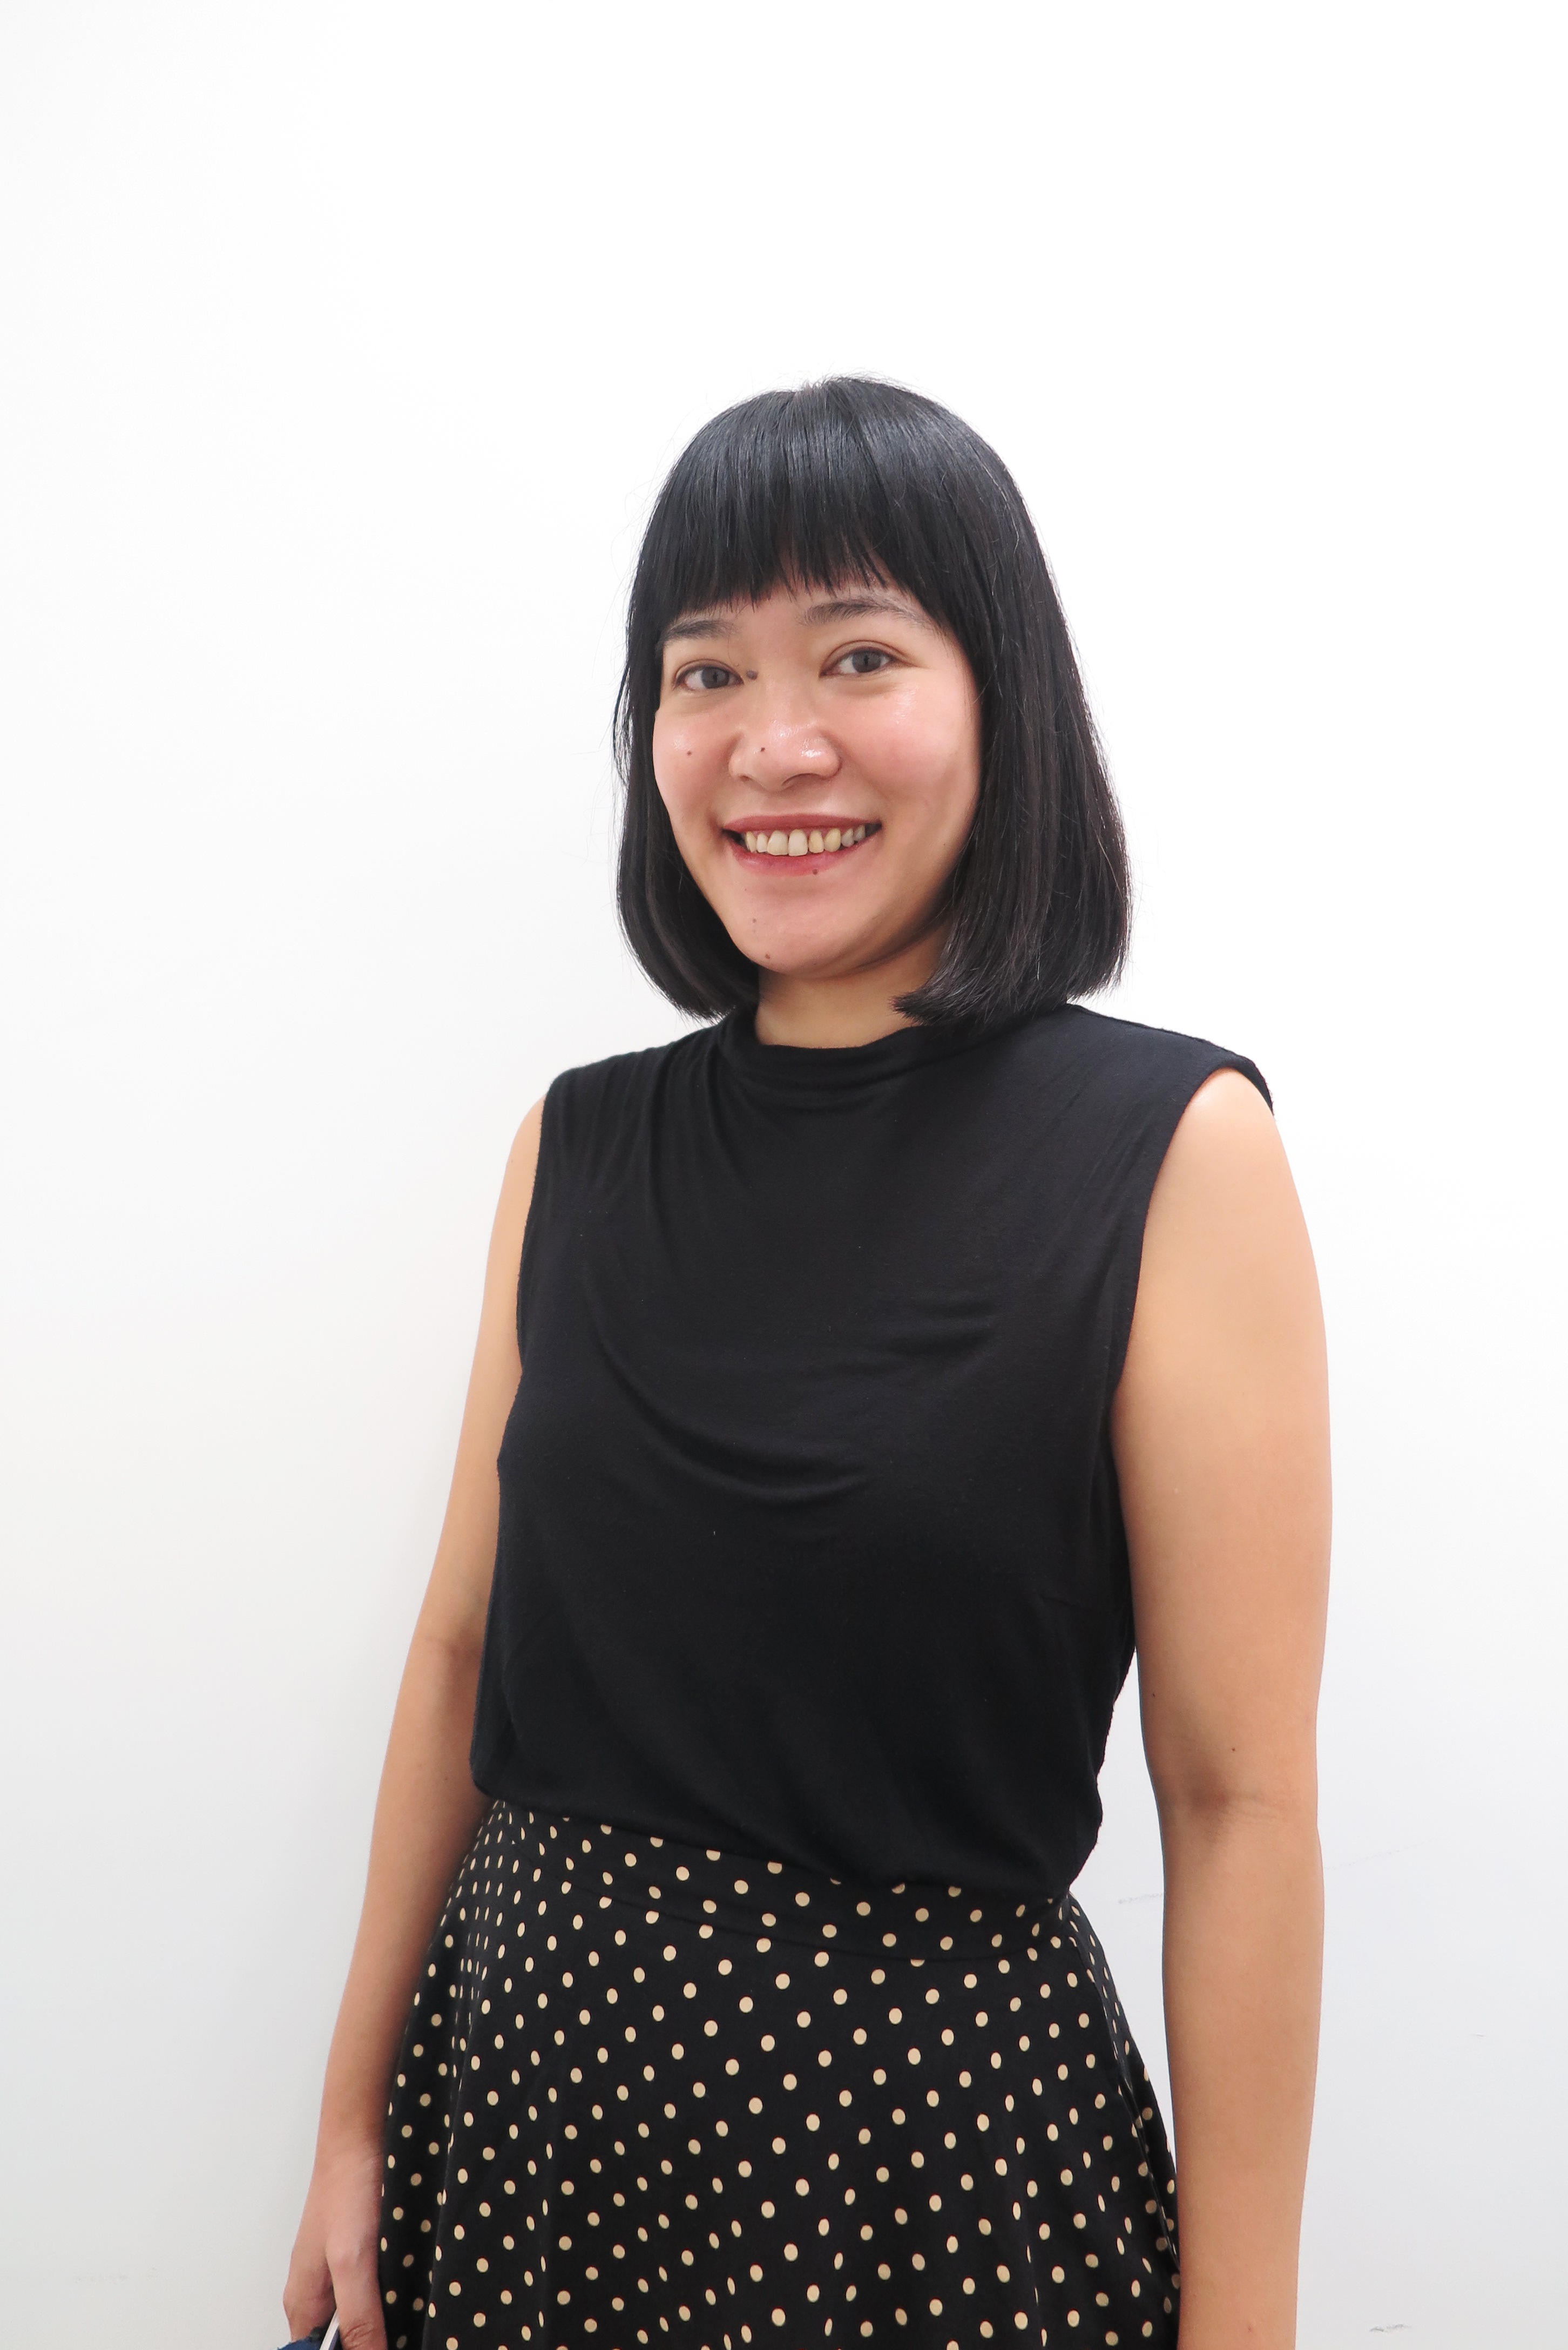 Photograph of Maesy Ang, smiling at the camera, against a white background. She is an Indonesian woman with bob-length hair, wearing a sleeveless black top and polka dot skirt.